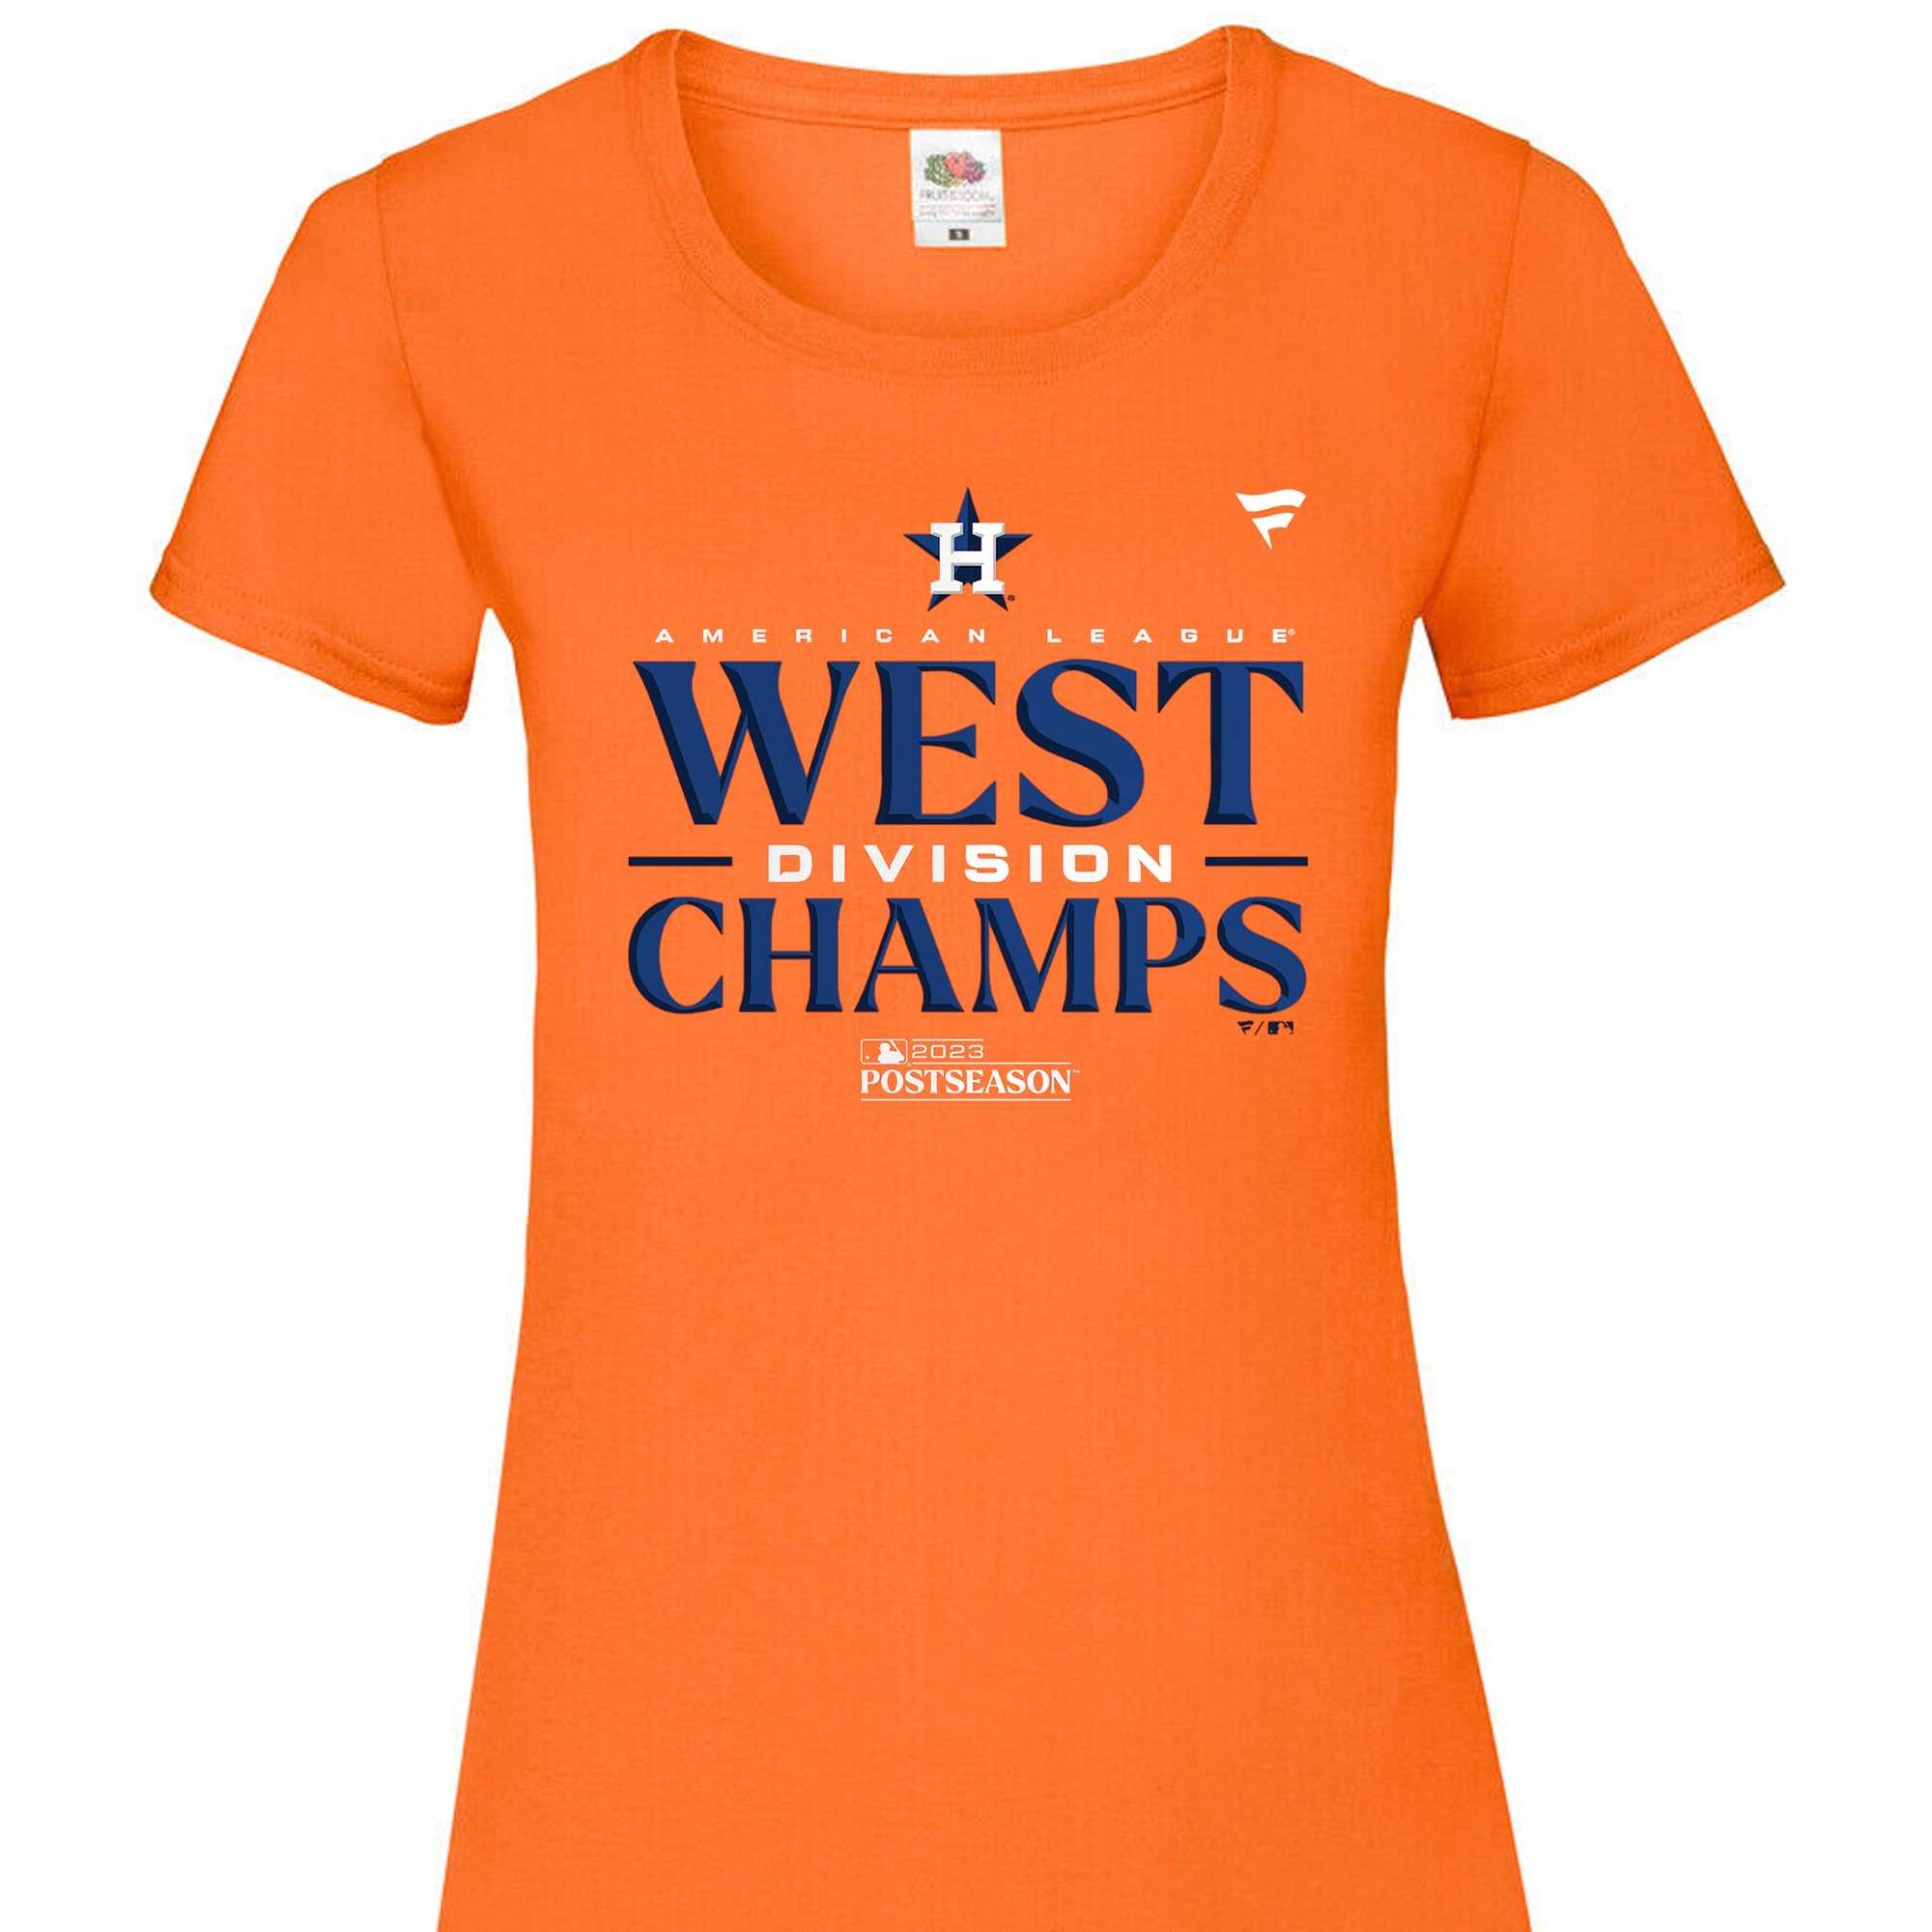 Official Houston Astros Al West Division Champions 2023 T-Shirt -  ReviewsTees